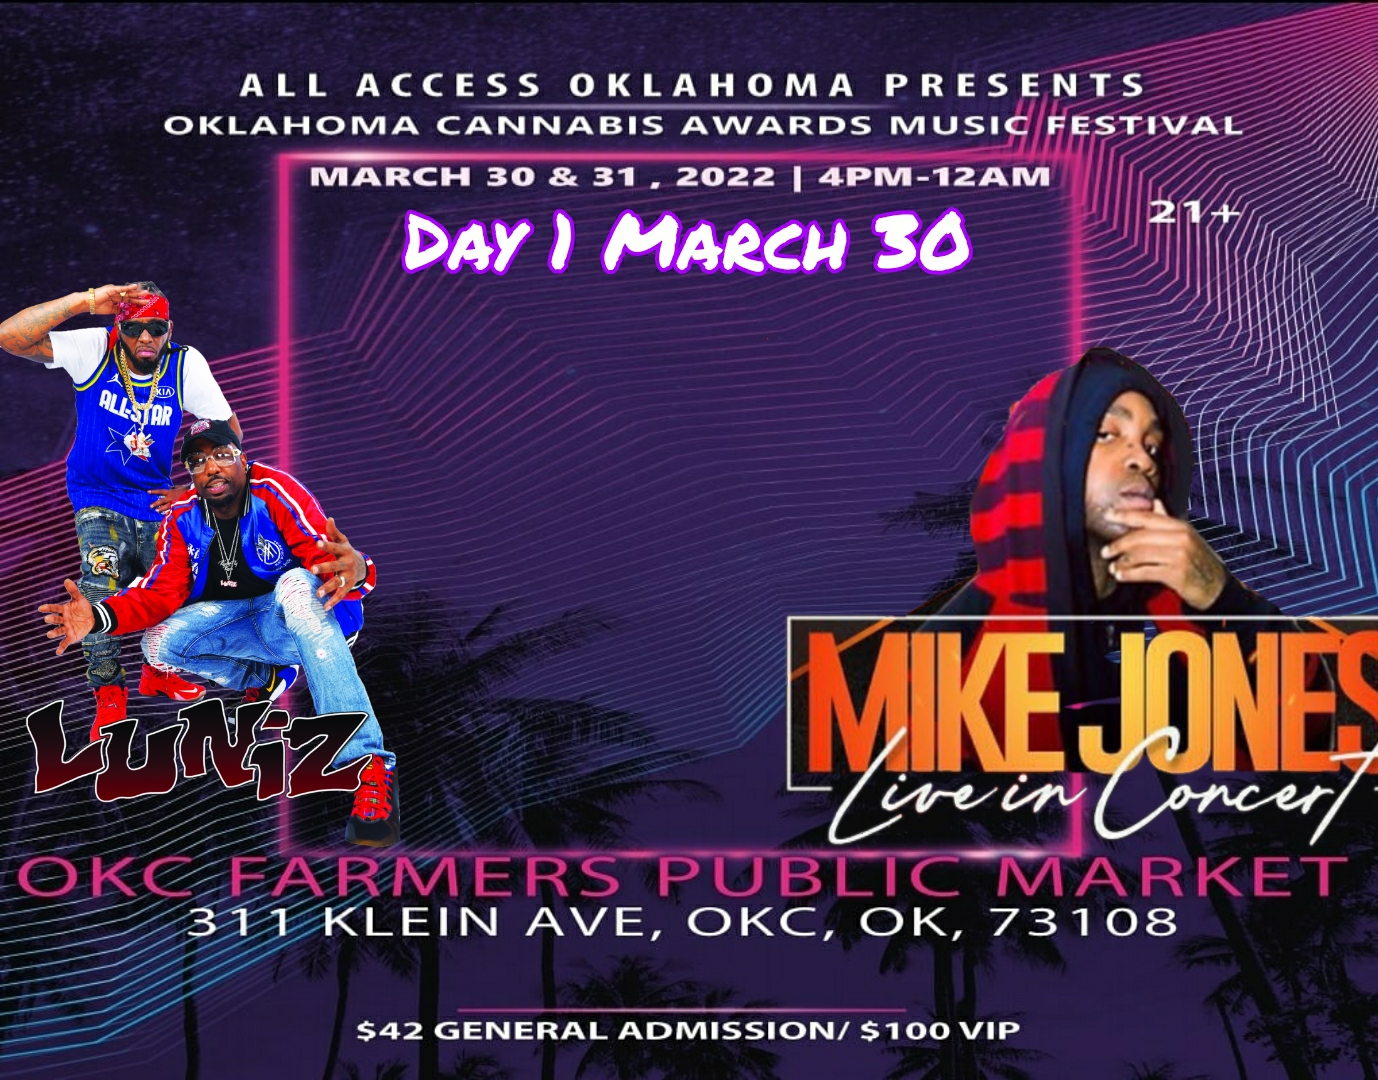 Okc Cannabis Awards Music Festival Official 3/30& 3/31,2022 Tickets, Wed, Mar 30, 2022 At 4:00 Pm | Eventbrite